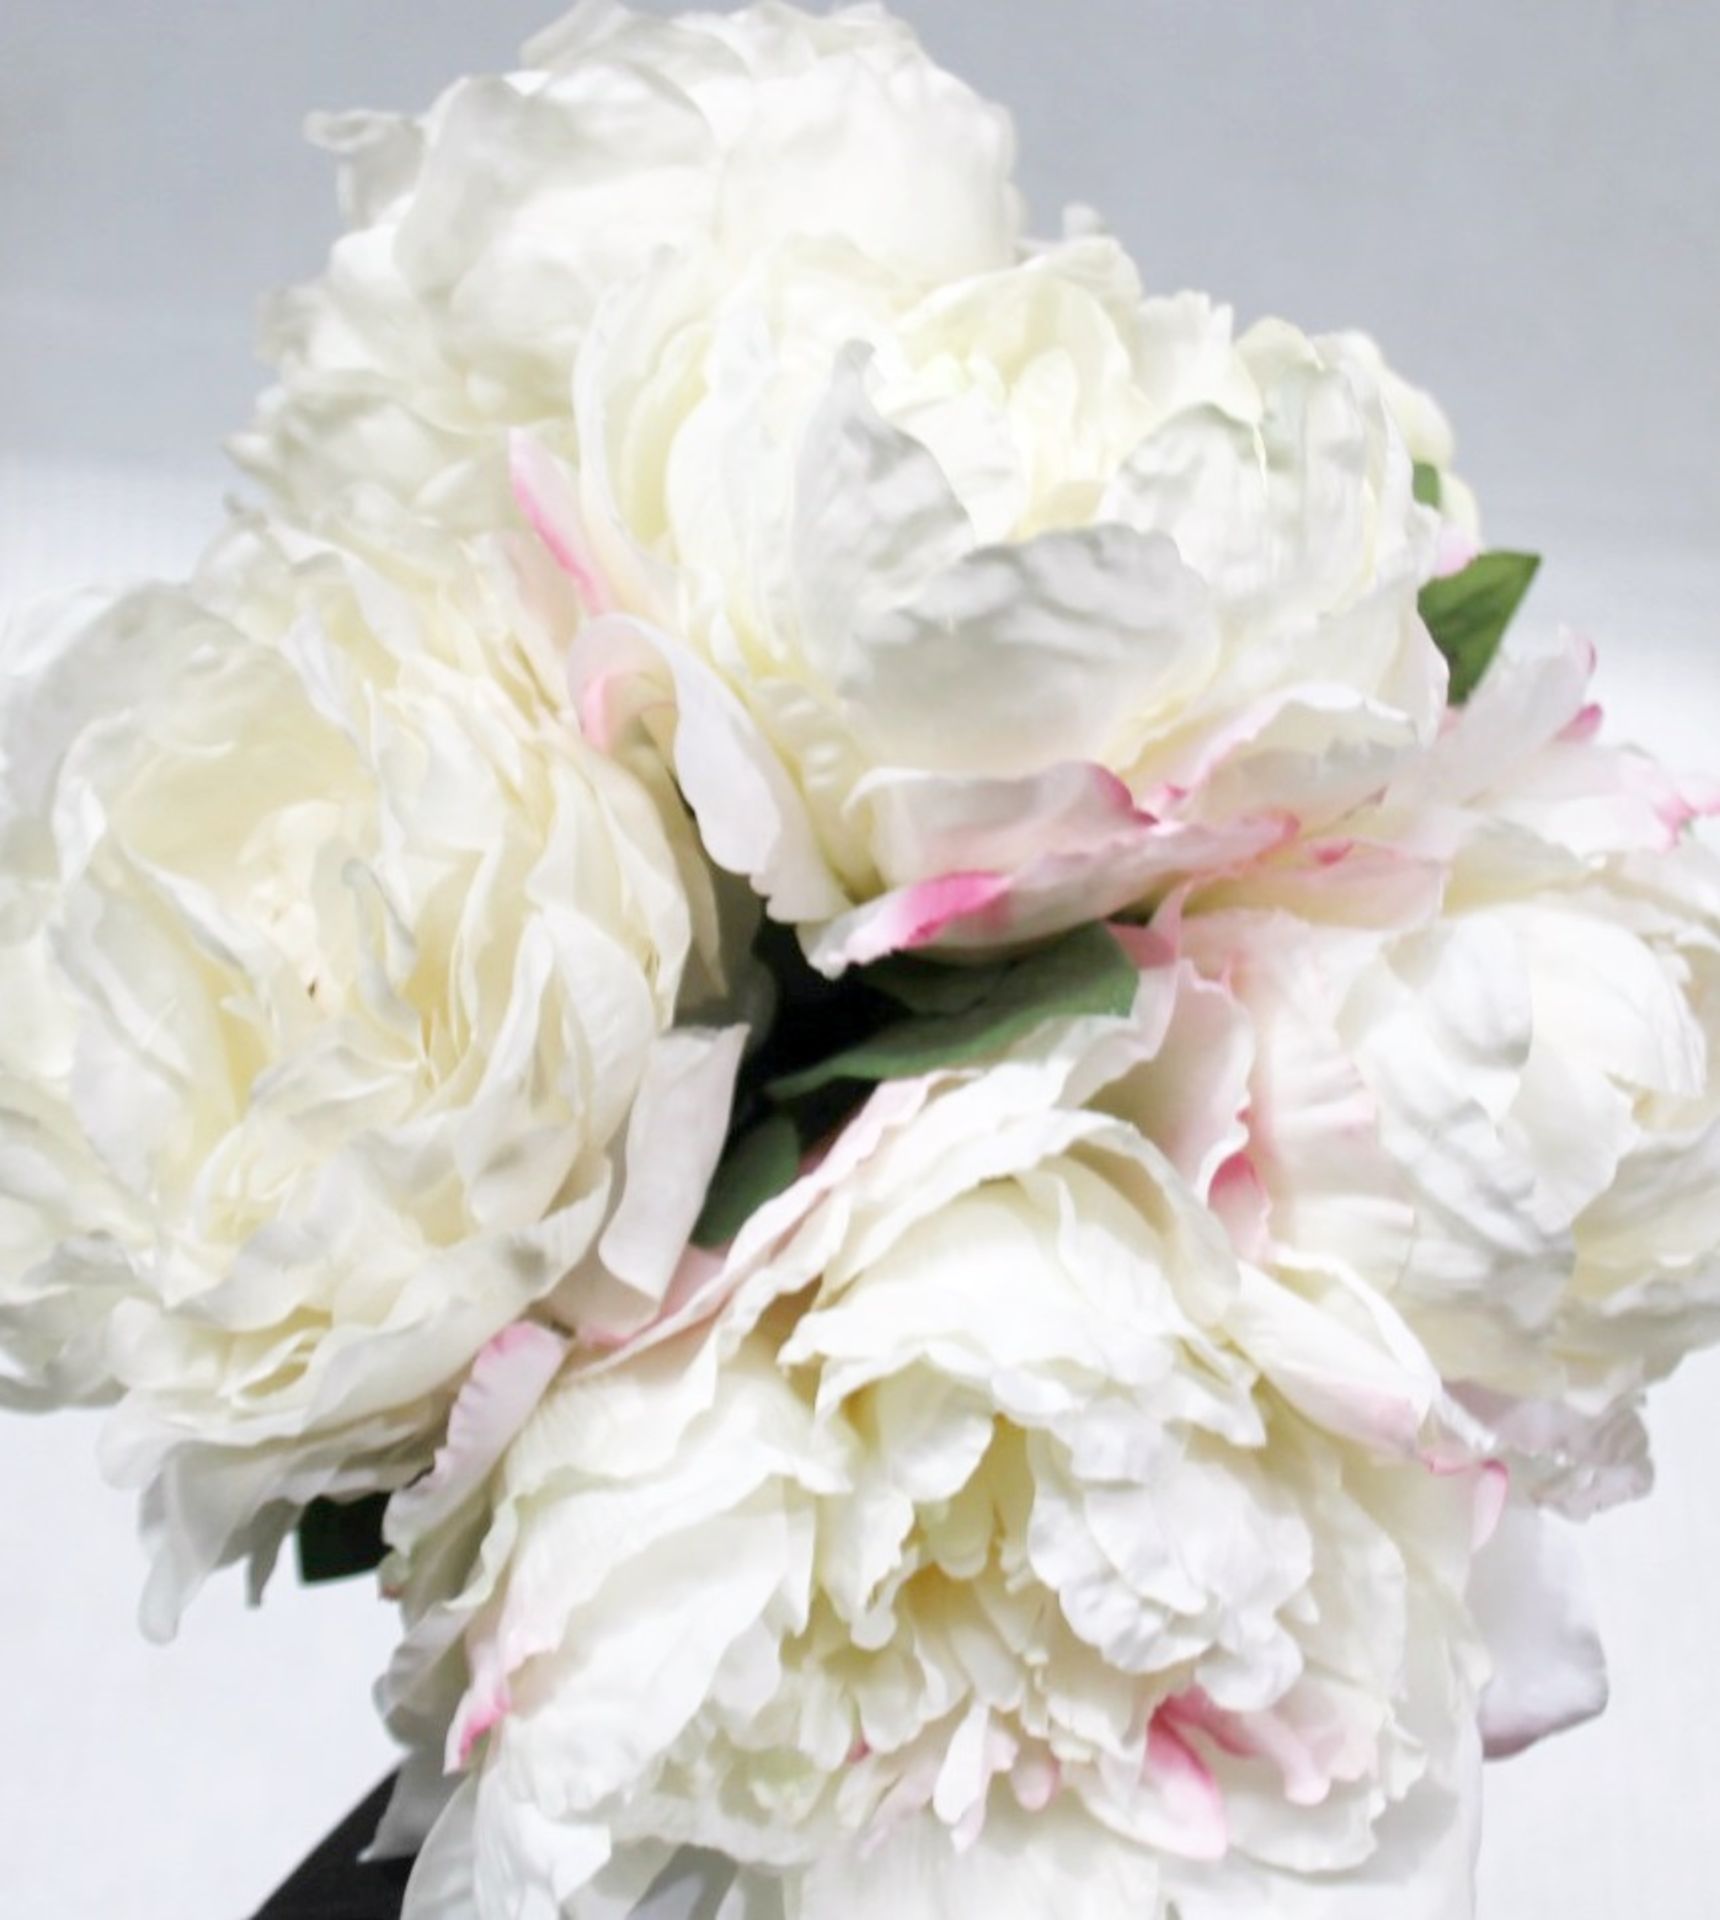 Large Quantity Of Premium Artificial Silk Flowers In Whites And Pinks - Approximately 100 pcs - Image 2 of 6